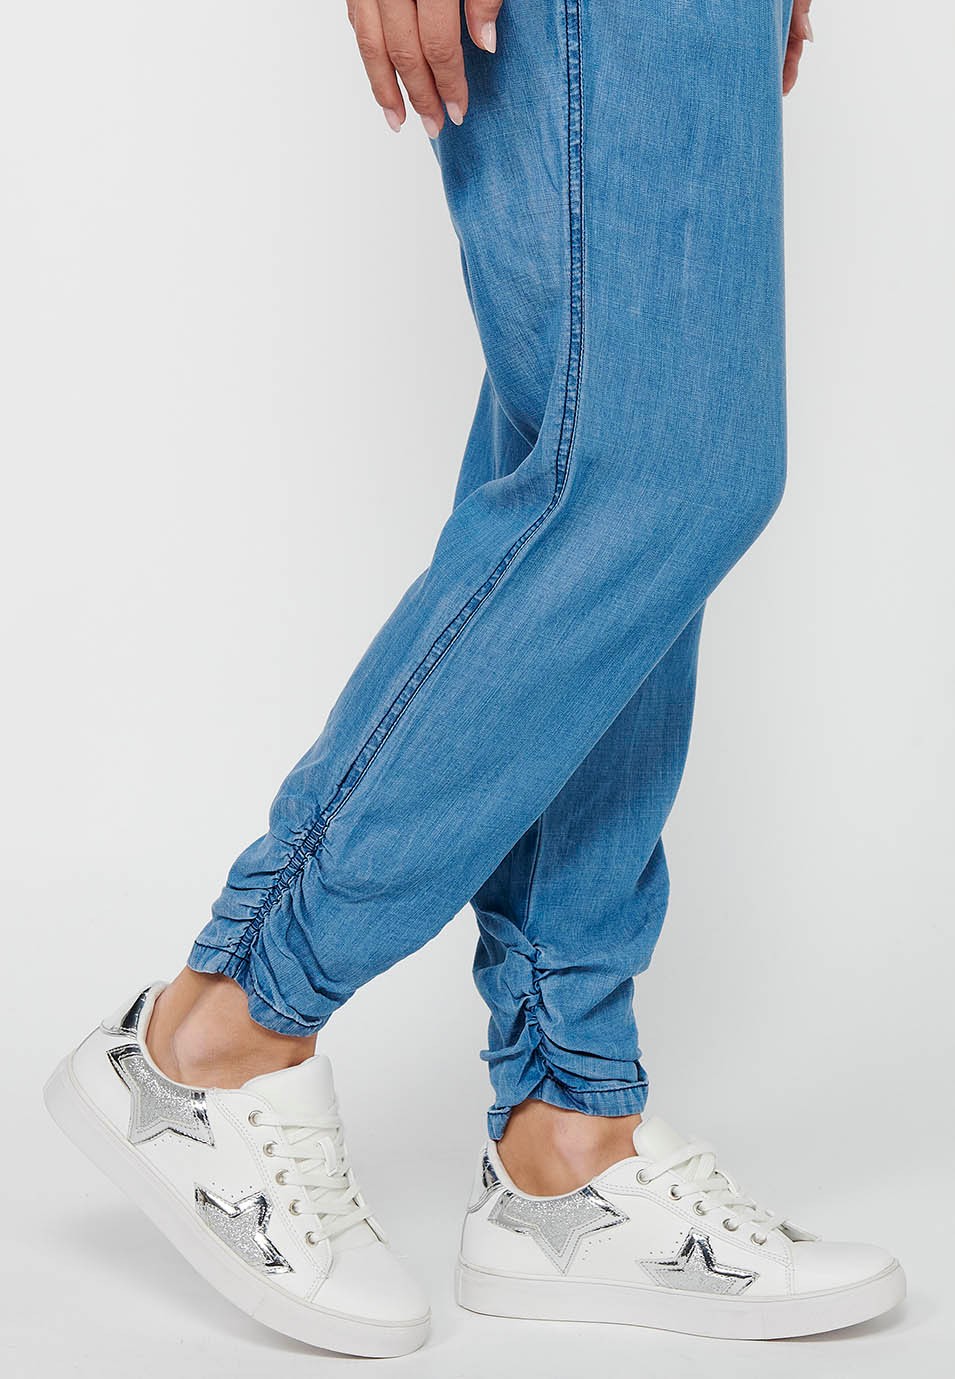 Long jogger pants with curled finish and rubberized waist with four pockets, two at the back with flap in Blue for Women 9